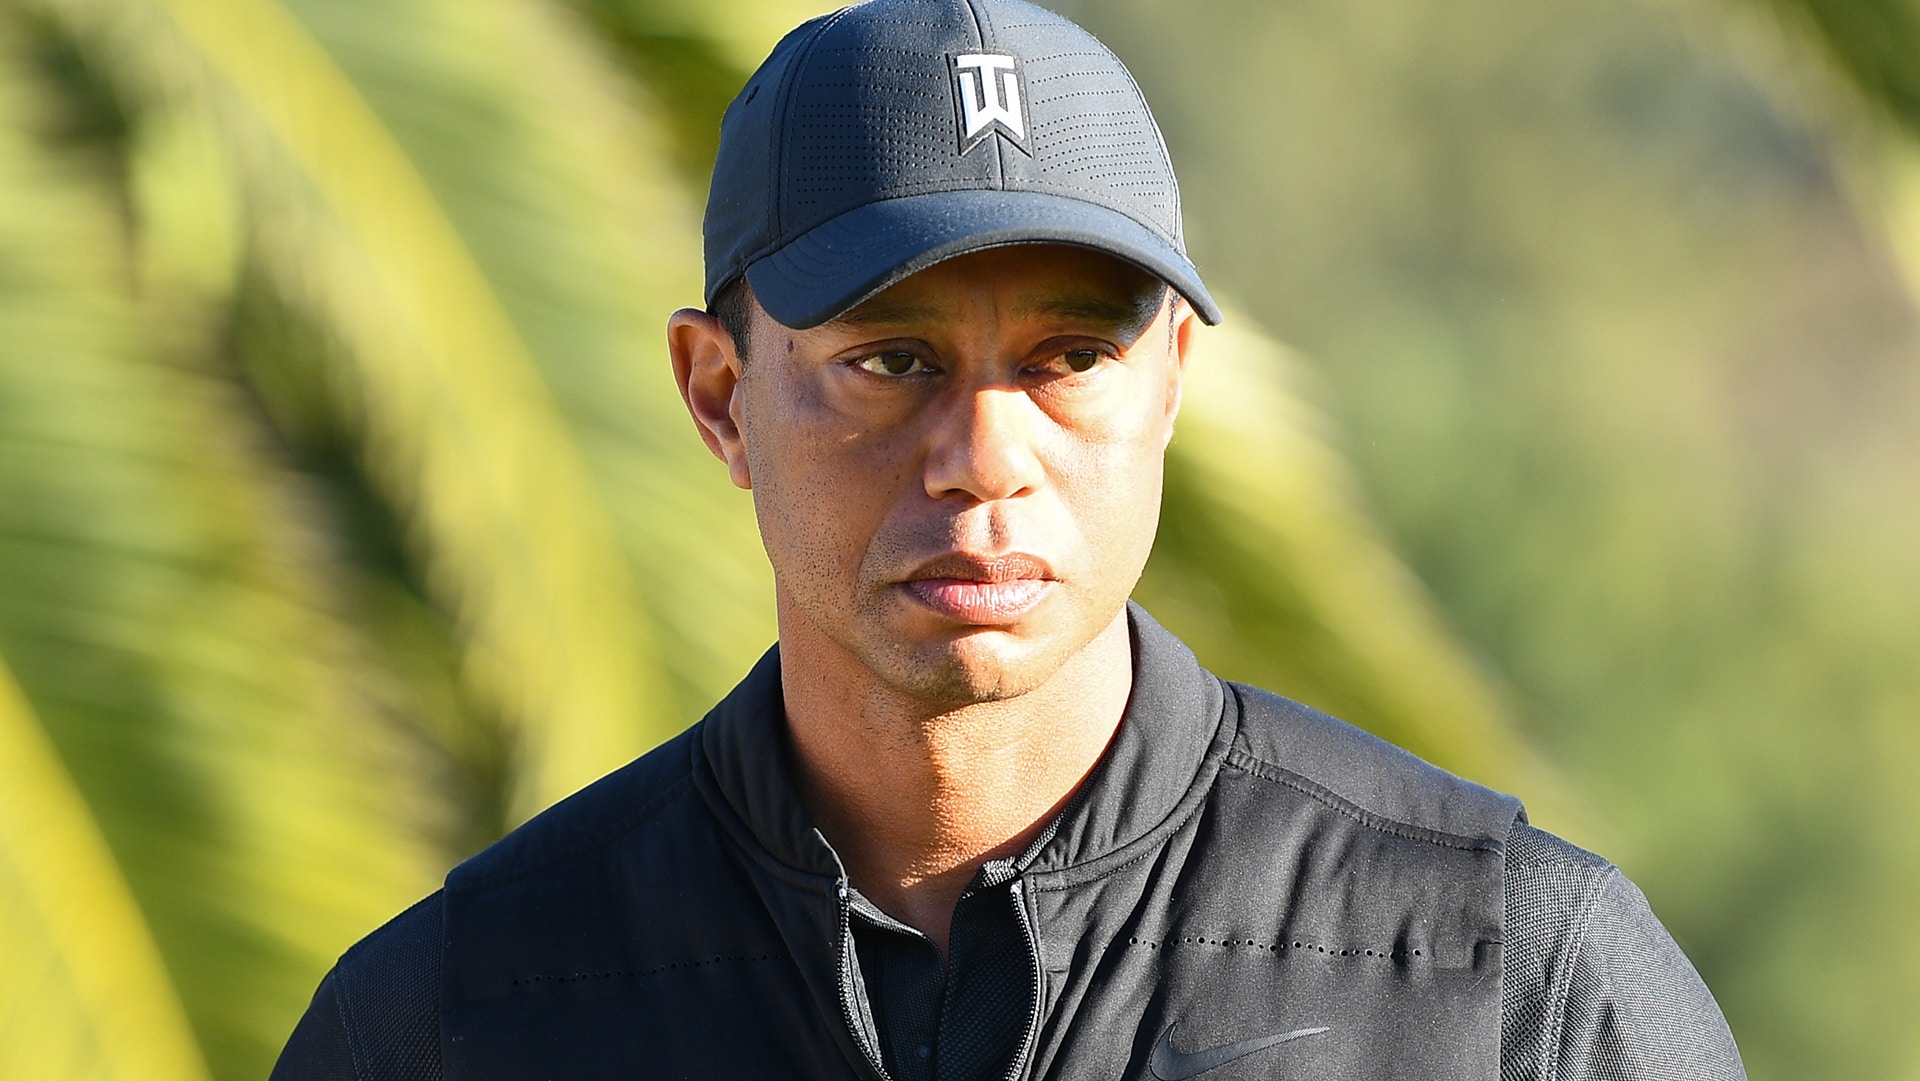 Tiger Woods hospitalized after serious car accident near Los Angeles